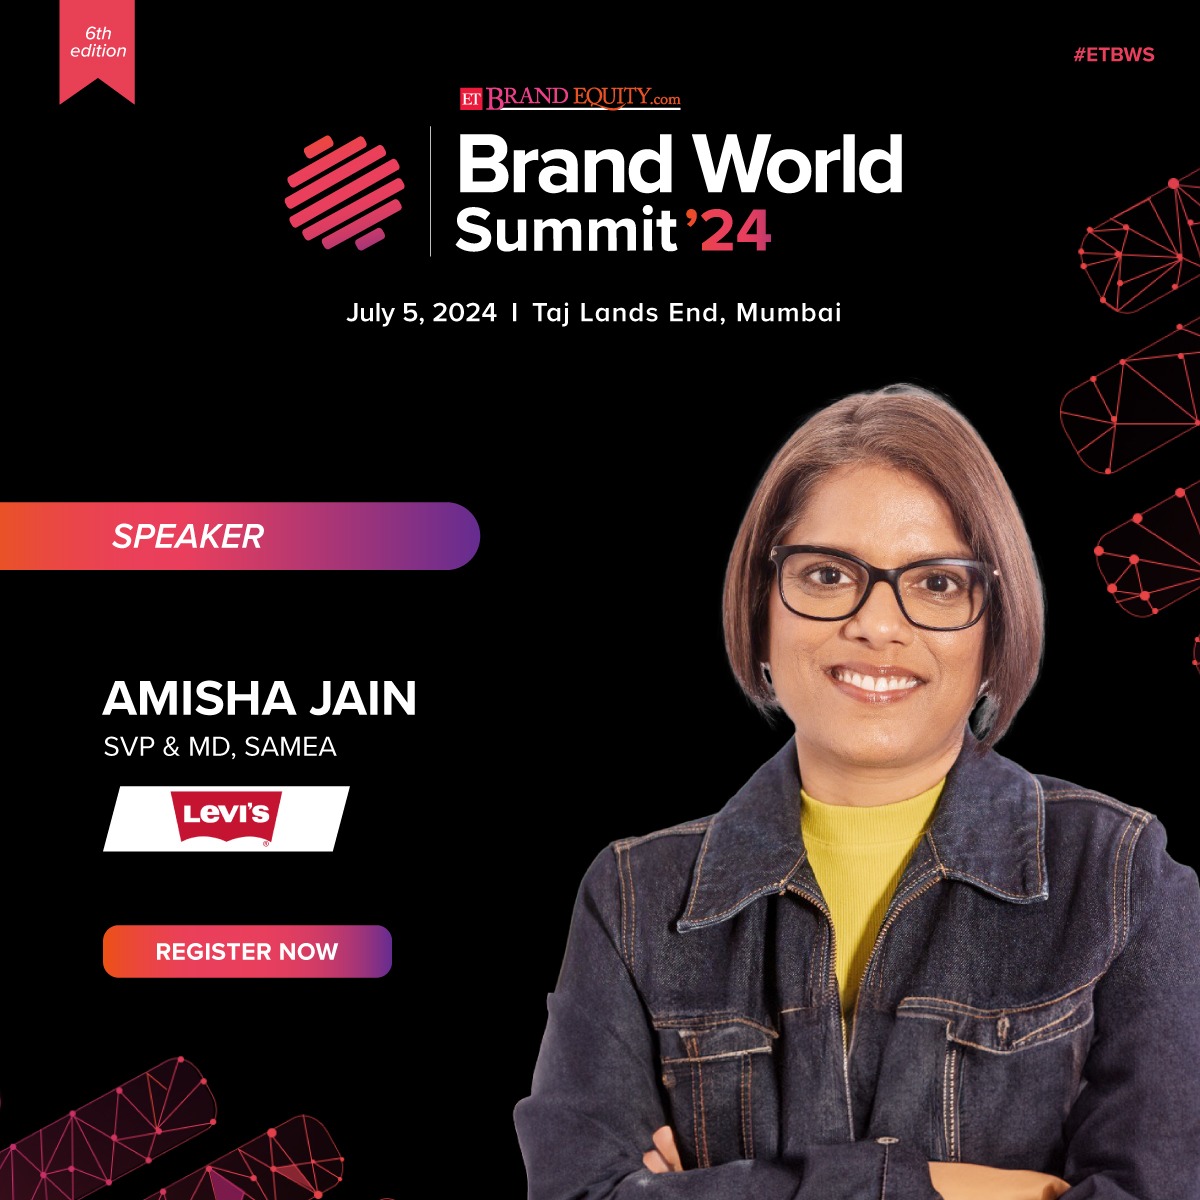 We're delighted to announce Amisha Jain, Senior Vice President and Managing Director of SAMEA at Levi Strauss & Co., as one of our distinguished speakers at #ETBWS!🔥

Link: bit.ly/3UyDorD

#BusinessWorldSummit #IndustryInsights #LeadershipForum #BusinessInnovation